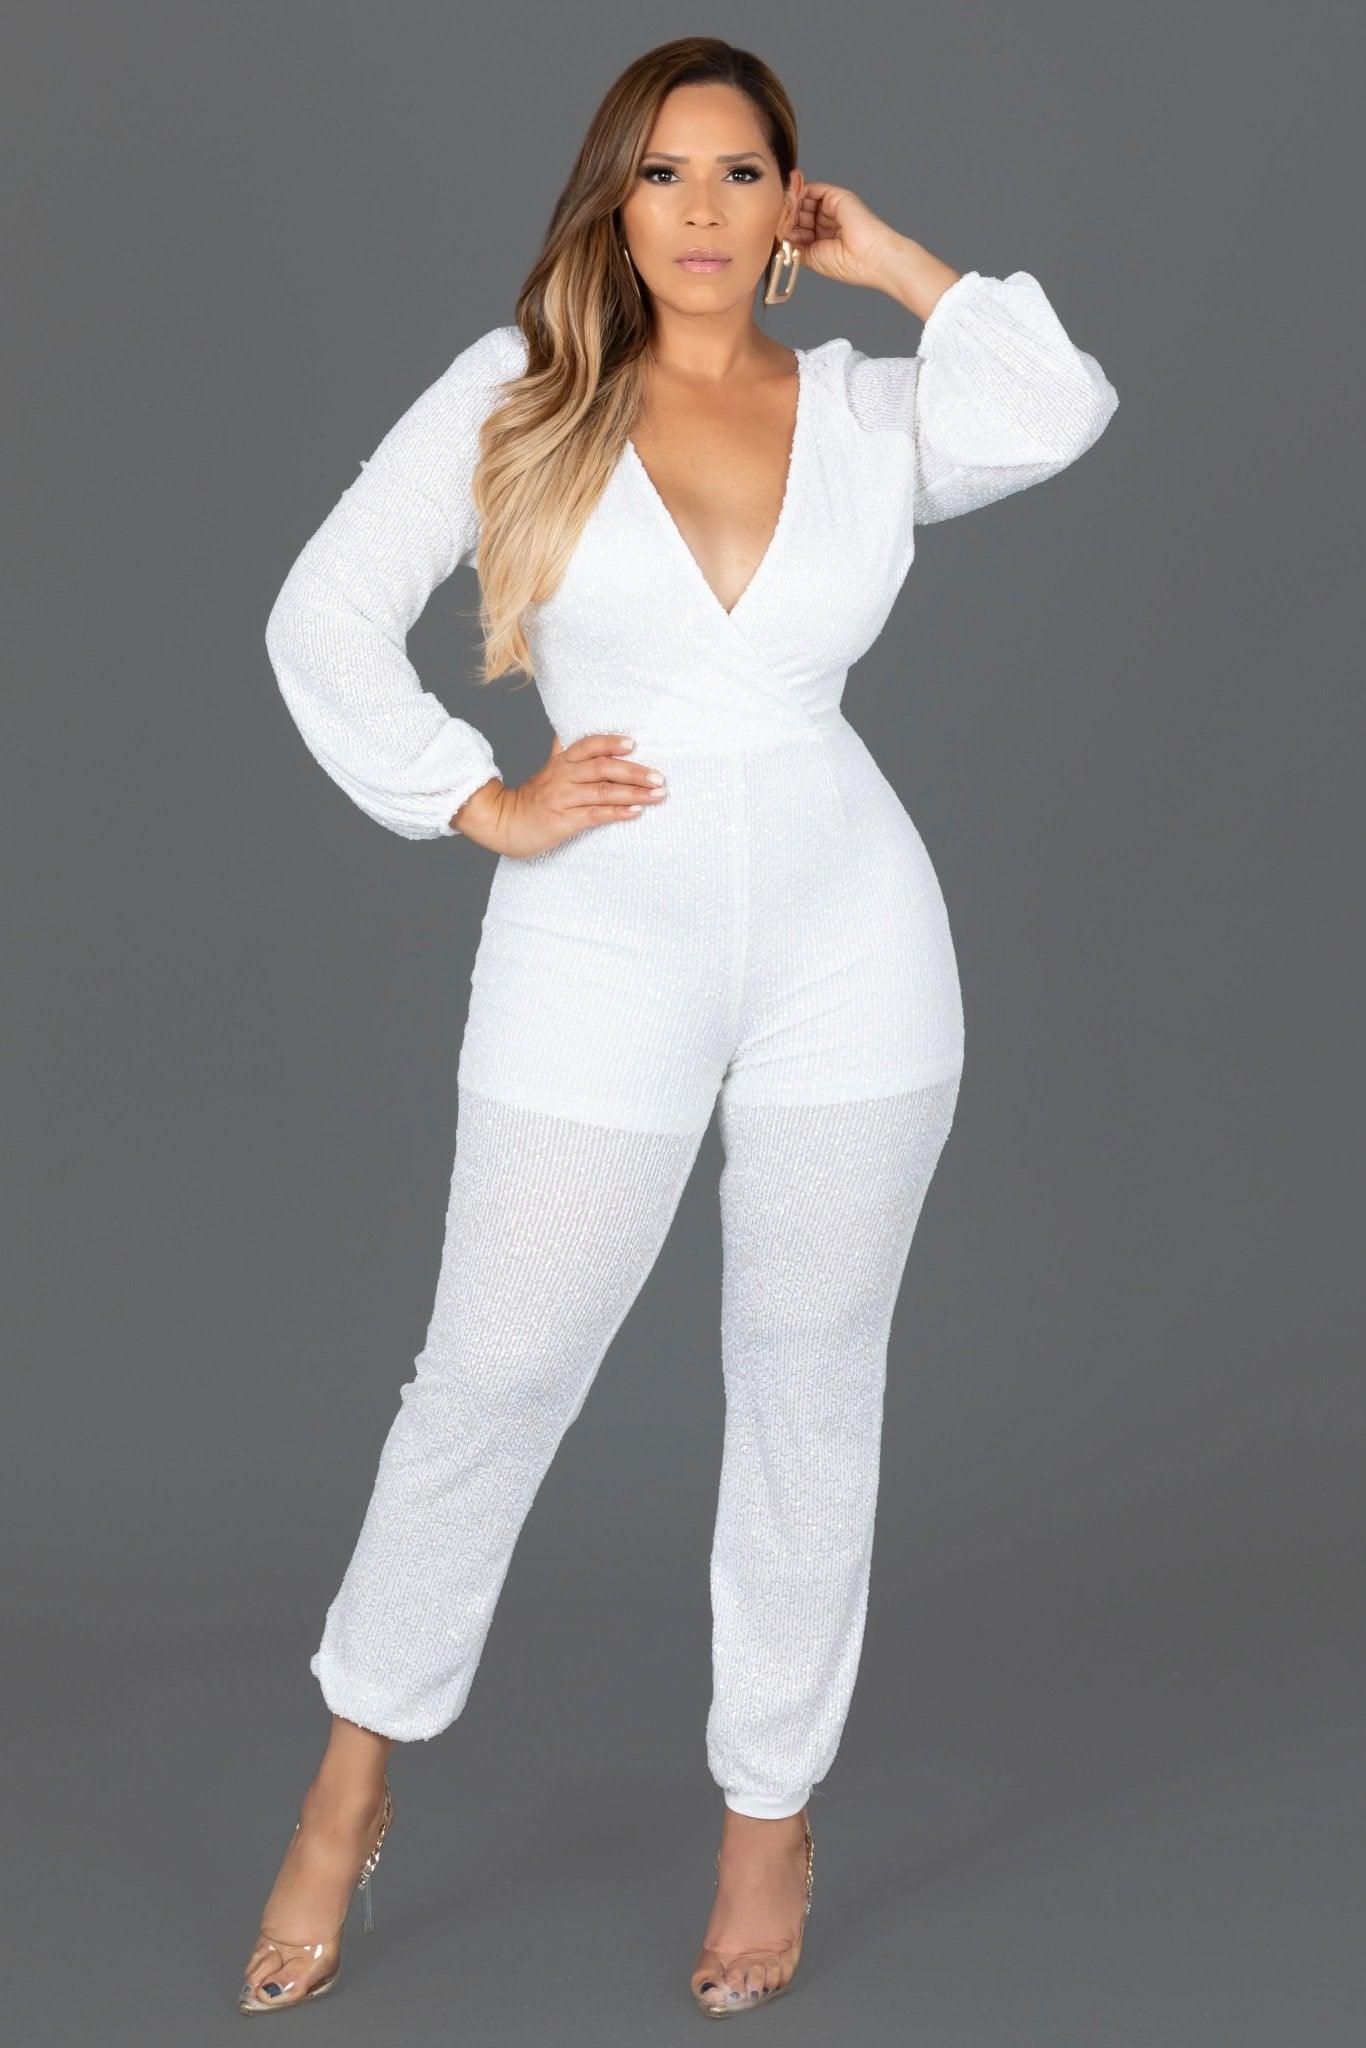 Emelina Sequins Jumpsuit - MY SEXY STYLES